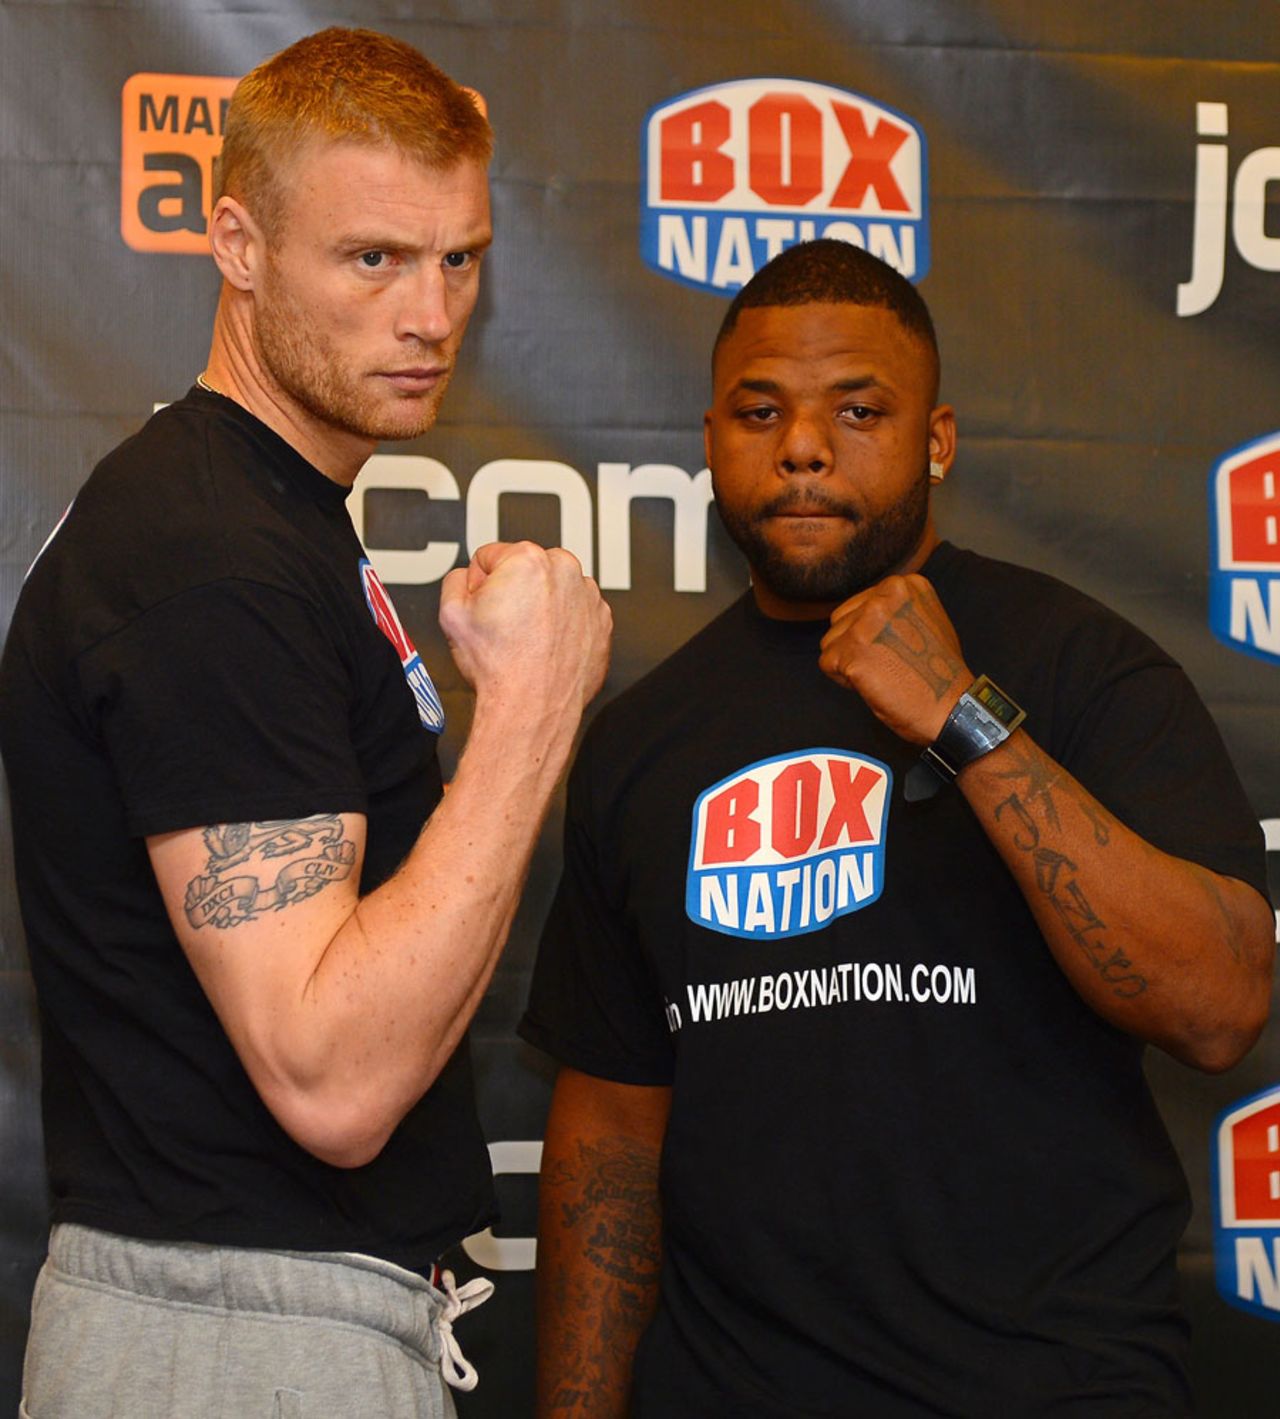 Andrew Flintoff poses with his opponent ahead of his debut bout as a boxer, Manchester, November 29, 2012